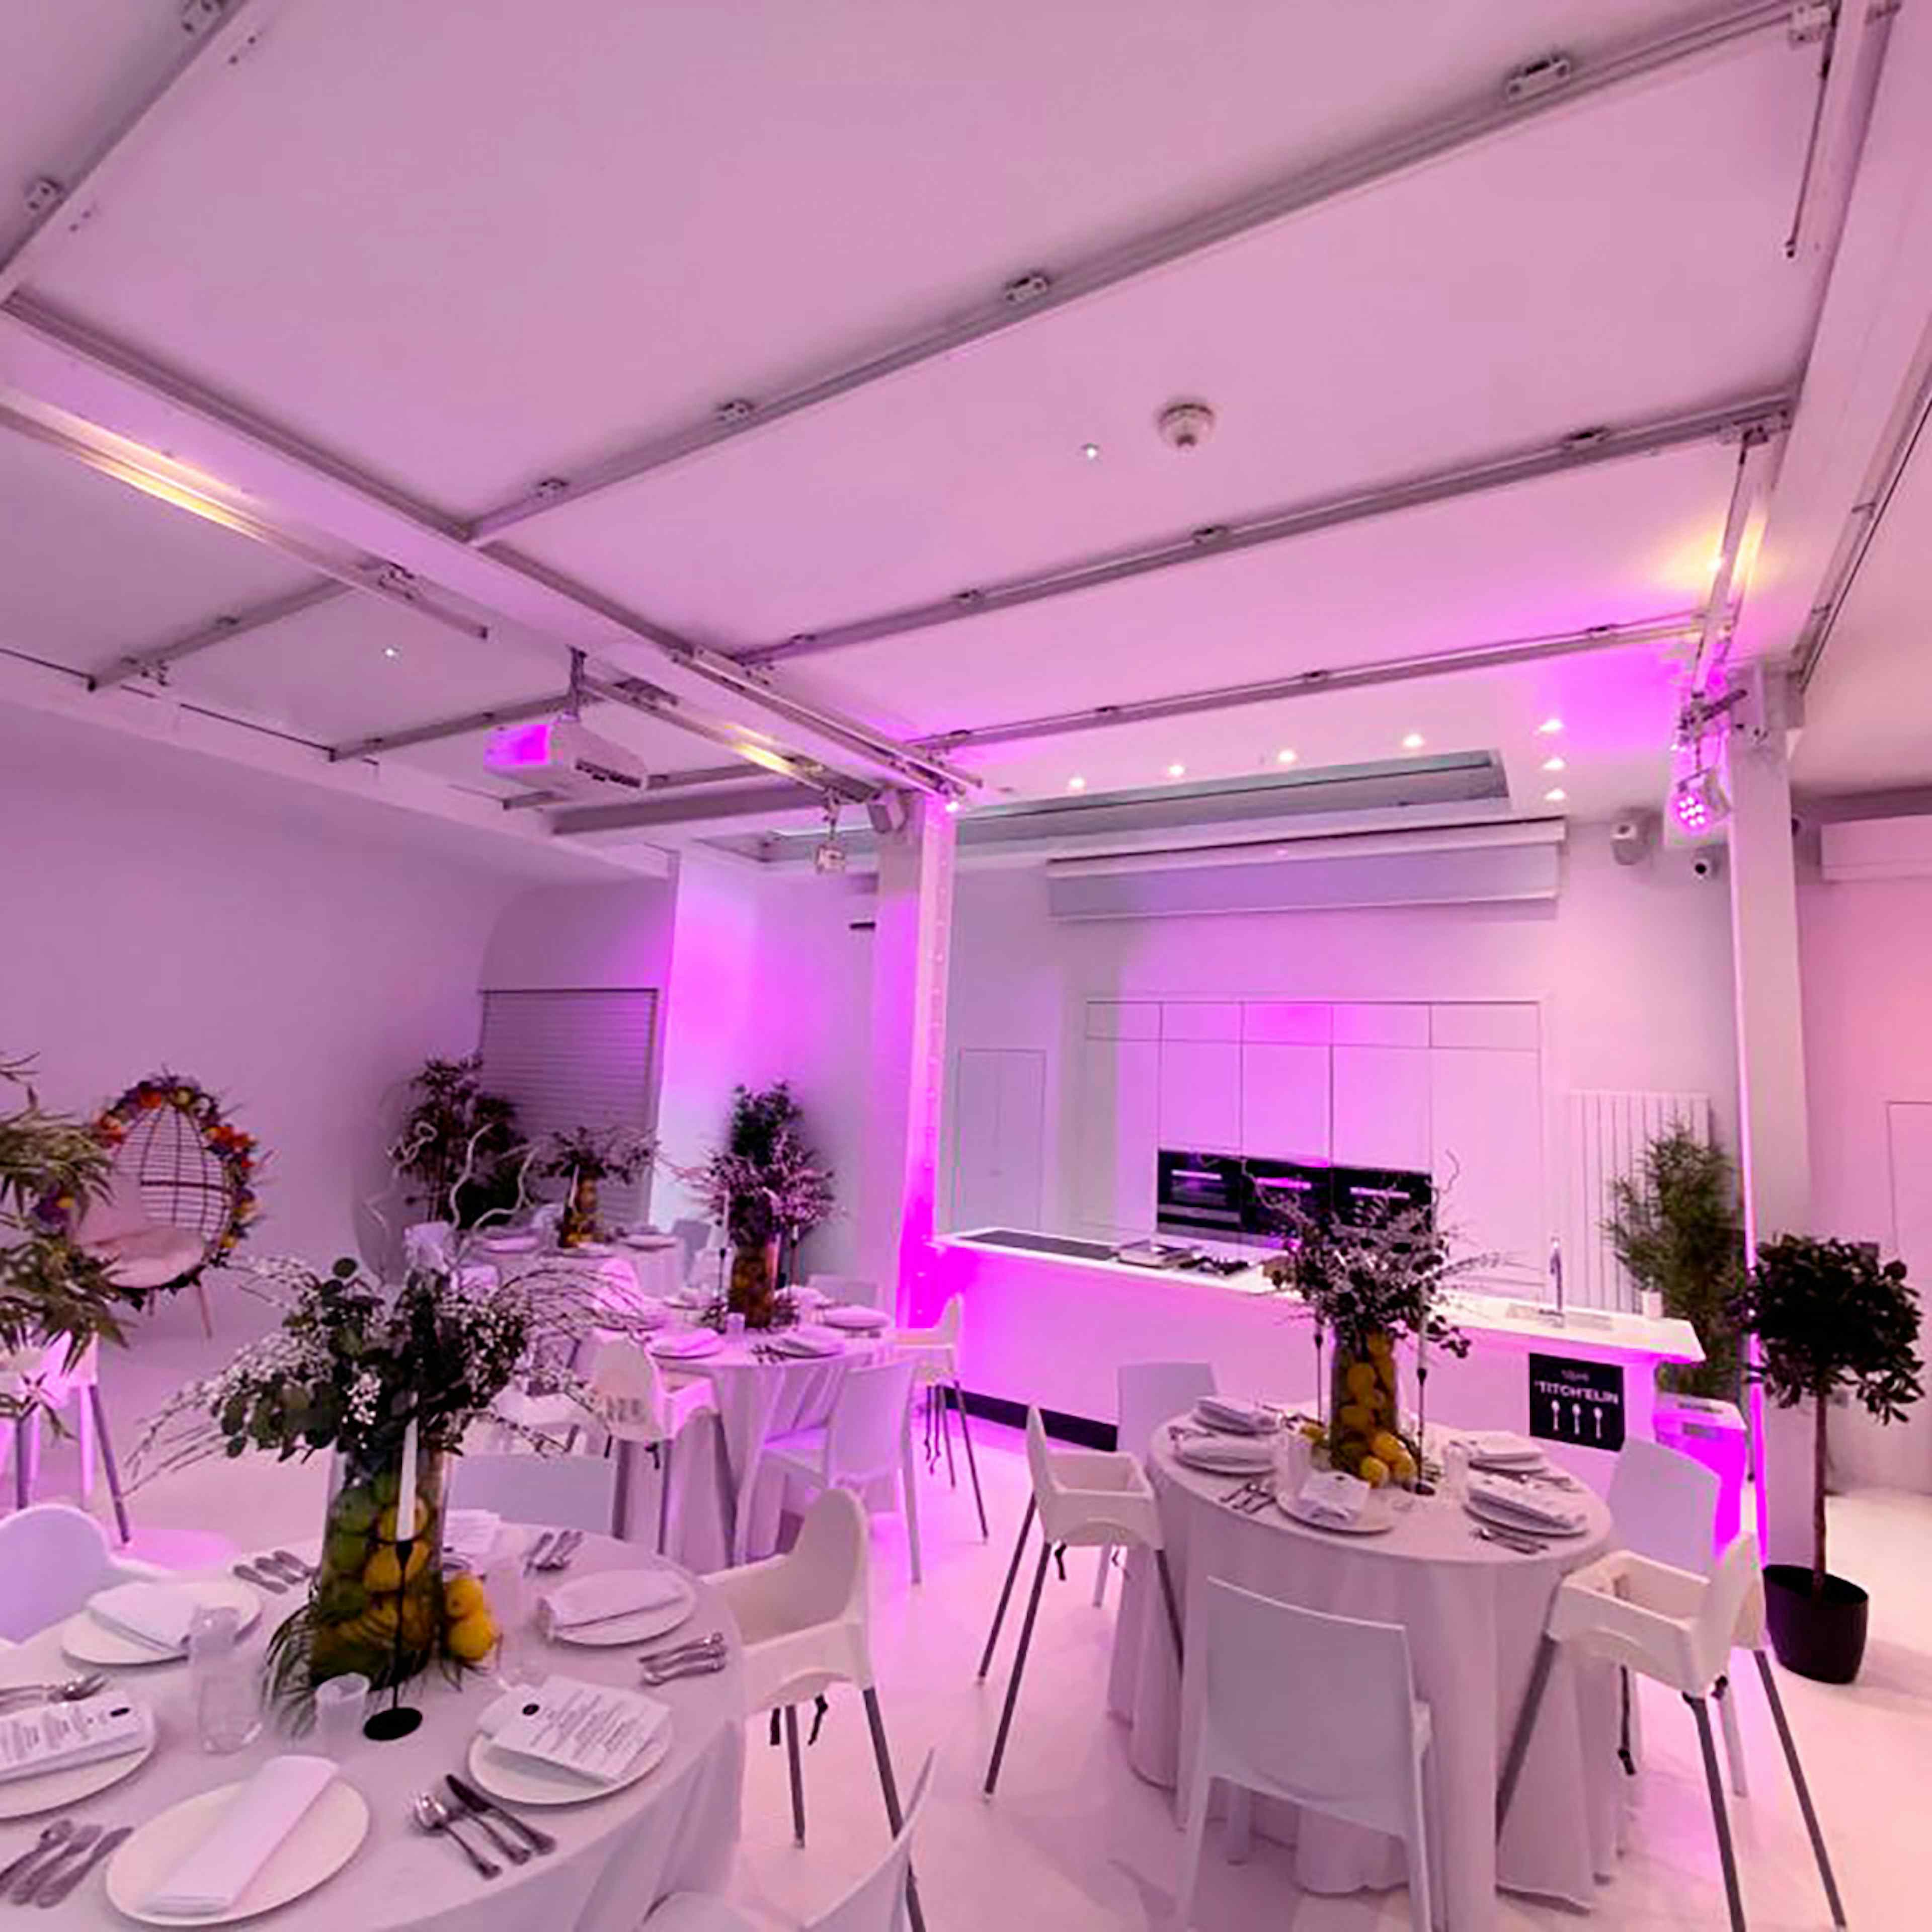 Icetank - Private Dining, Cooking Presentations and Wedding Receptions image 3